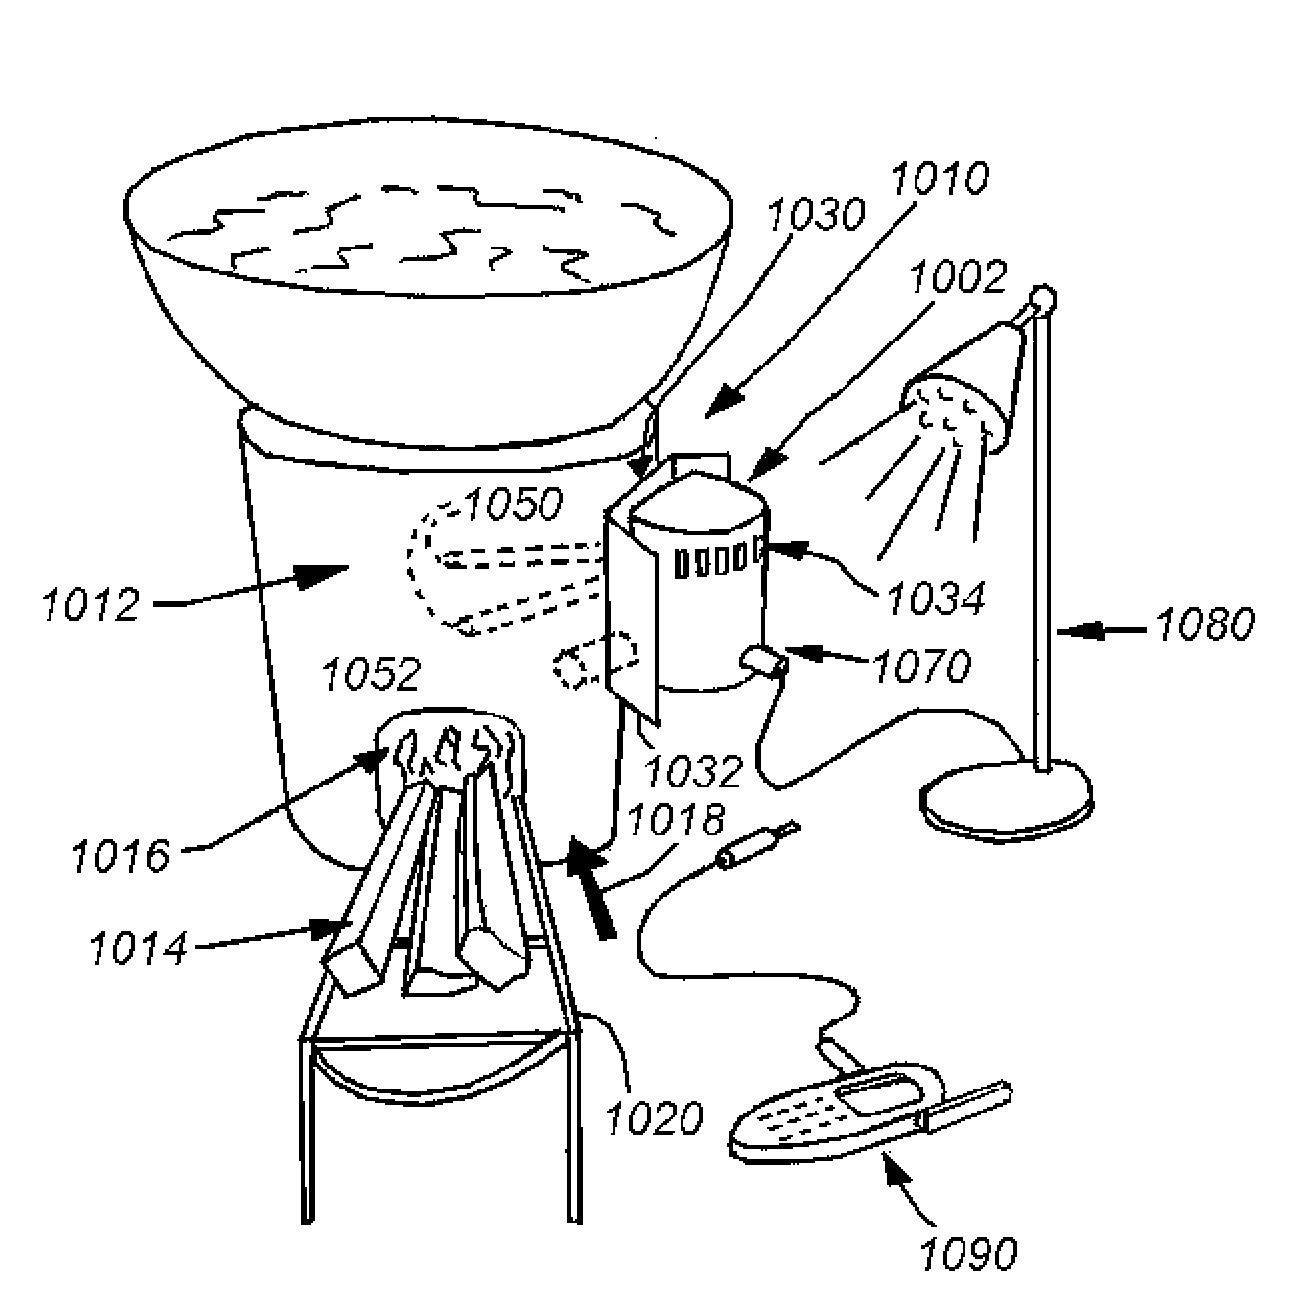 Portable combustion device utilizing thermoelectrical generation